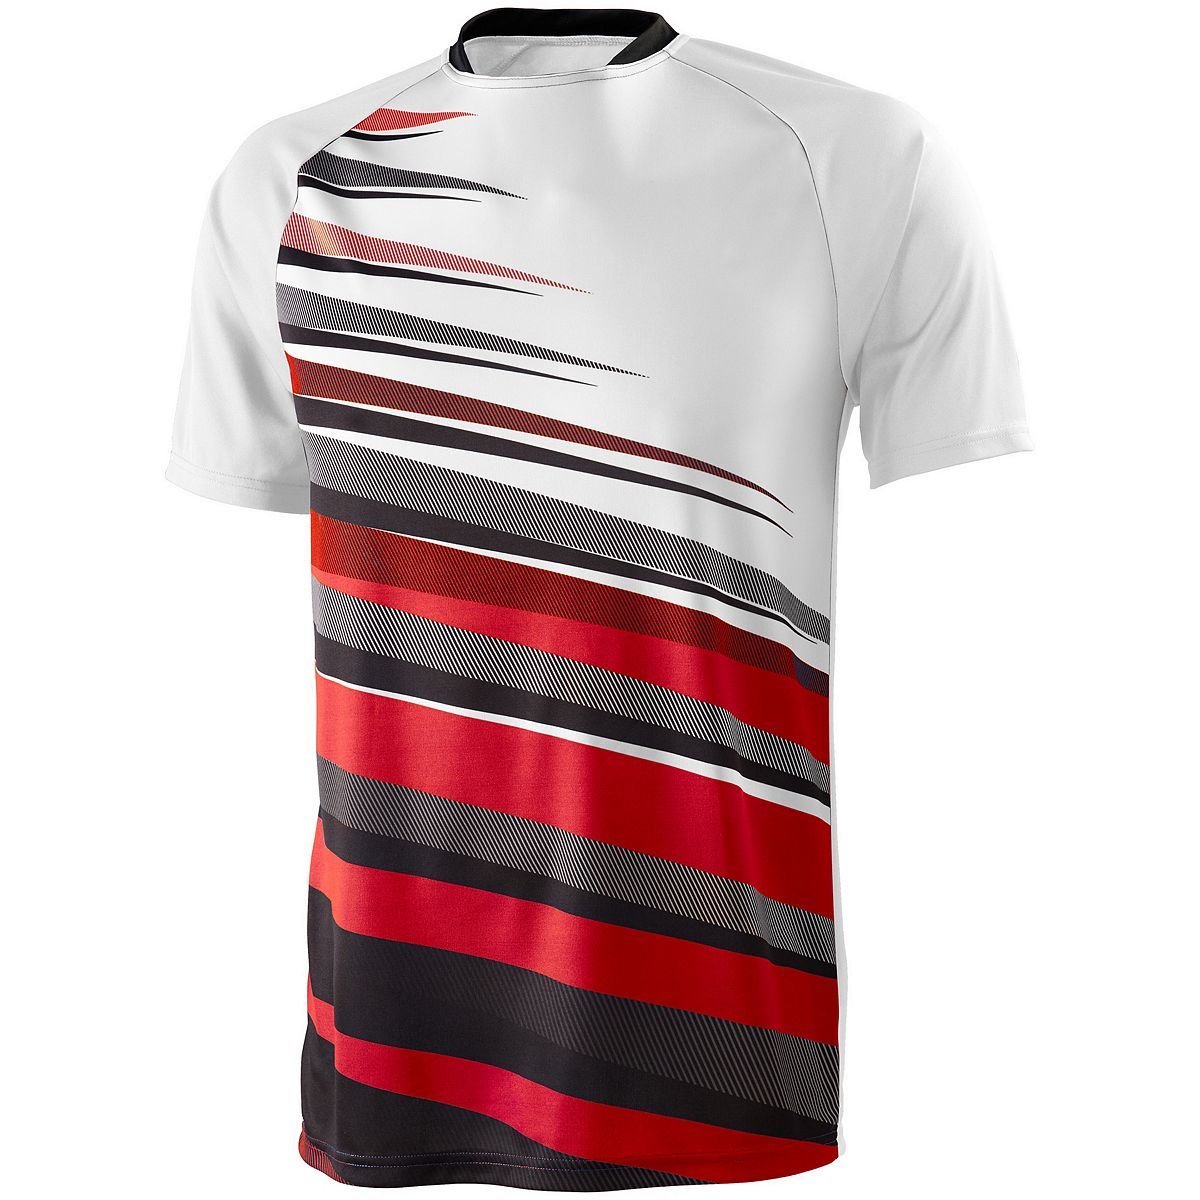 High 5 Adult Galactic Jersey in White/Black/Scarlet  -Part of the Adult, Adult-Jersey, High5-Products, Soccer, Shirts, All-Sports-1 product lines at KanaleyCreations.com